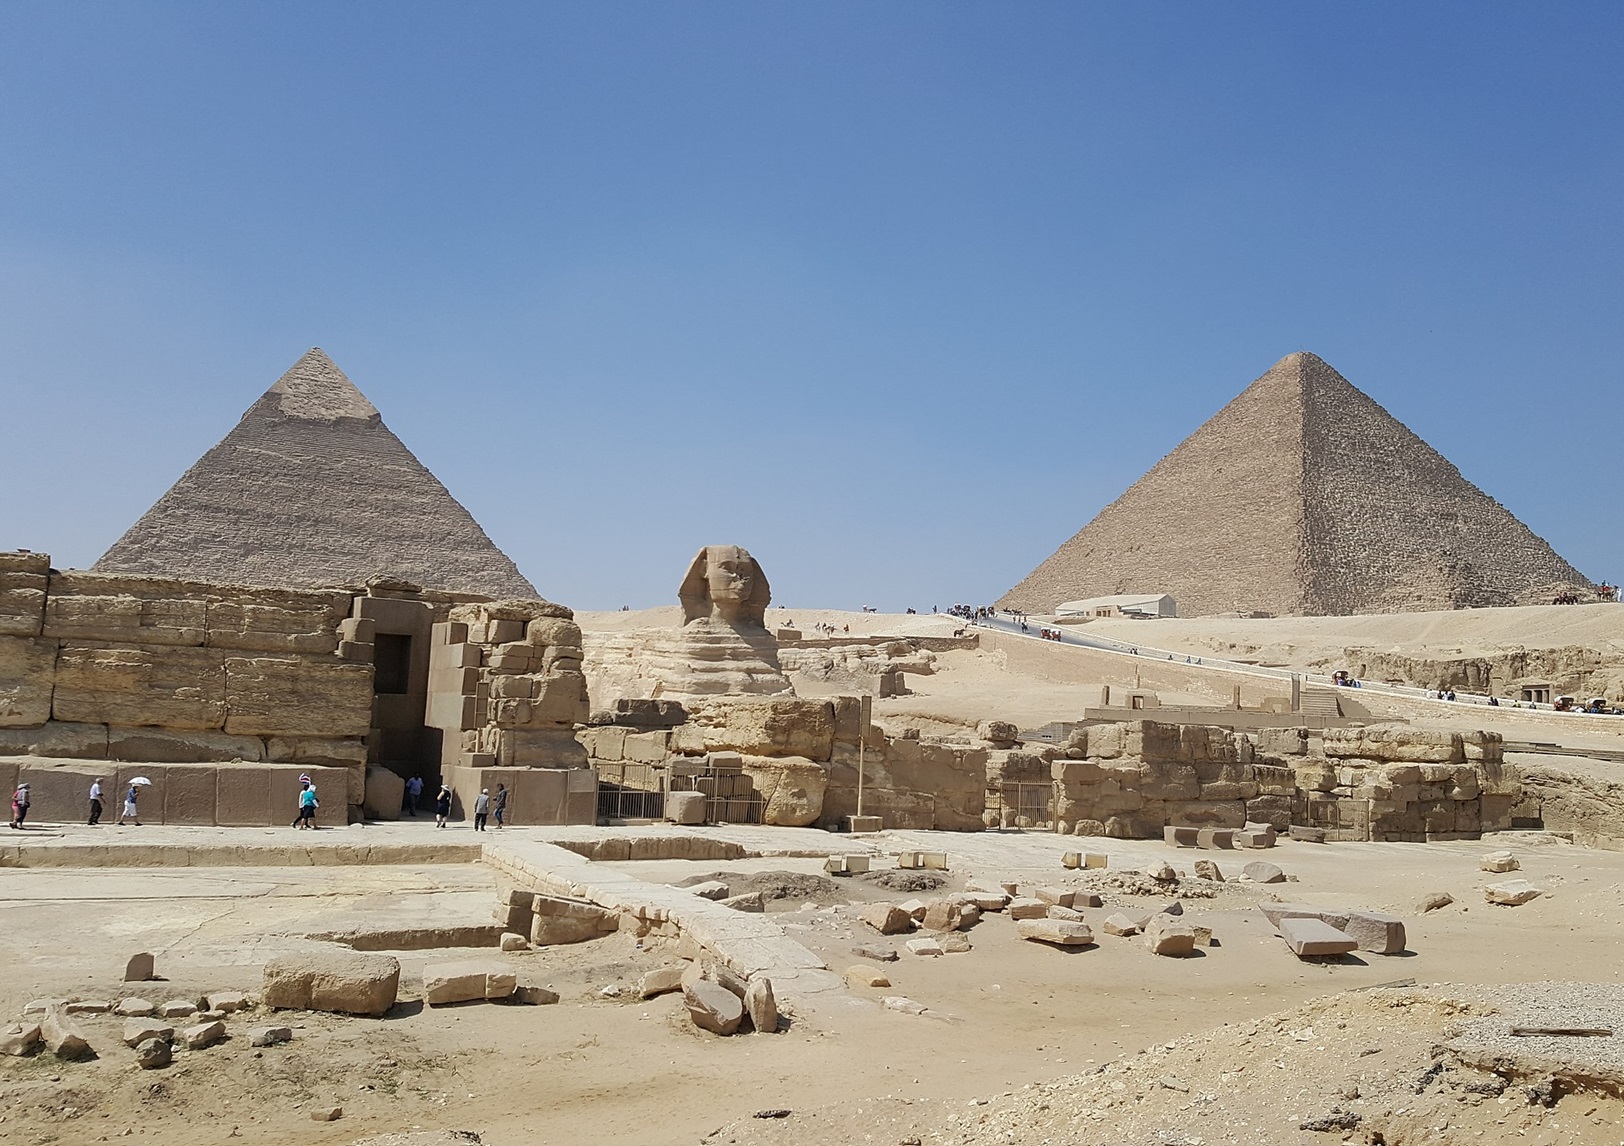 <p><strong>Location: </strong>Giza Necropolis, Egypt</p>  <p>If you've dreamt of seeing the magnificent Pyramids of Giza, be warned. Your expectations are most likely much higher than what reality has to offer.</p>